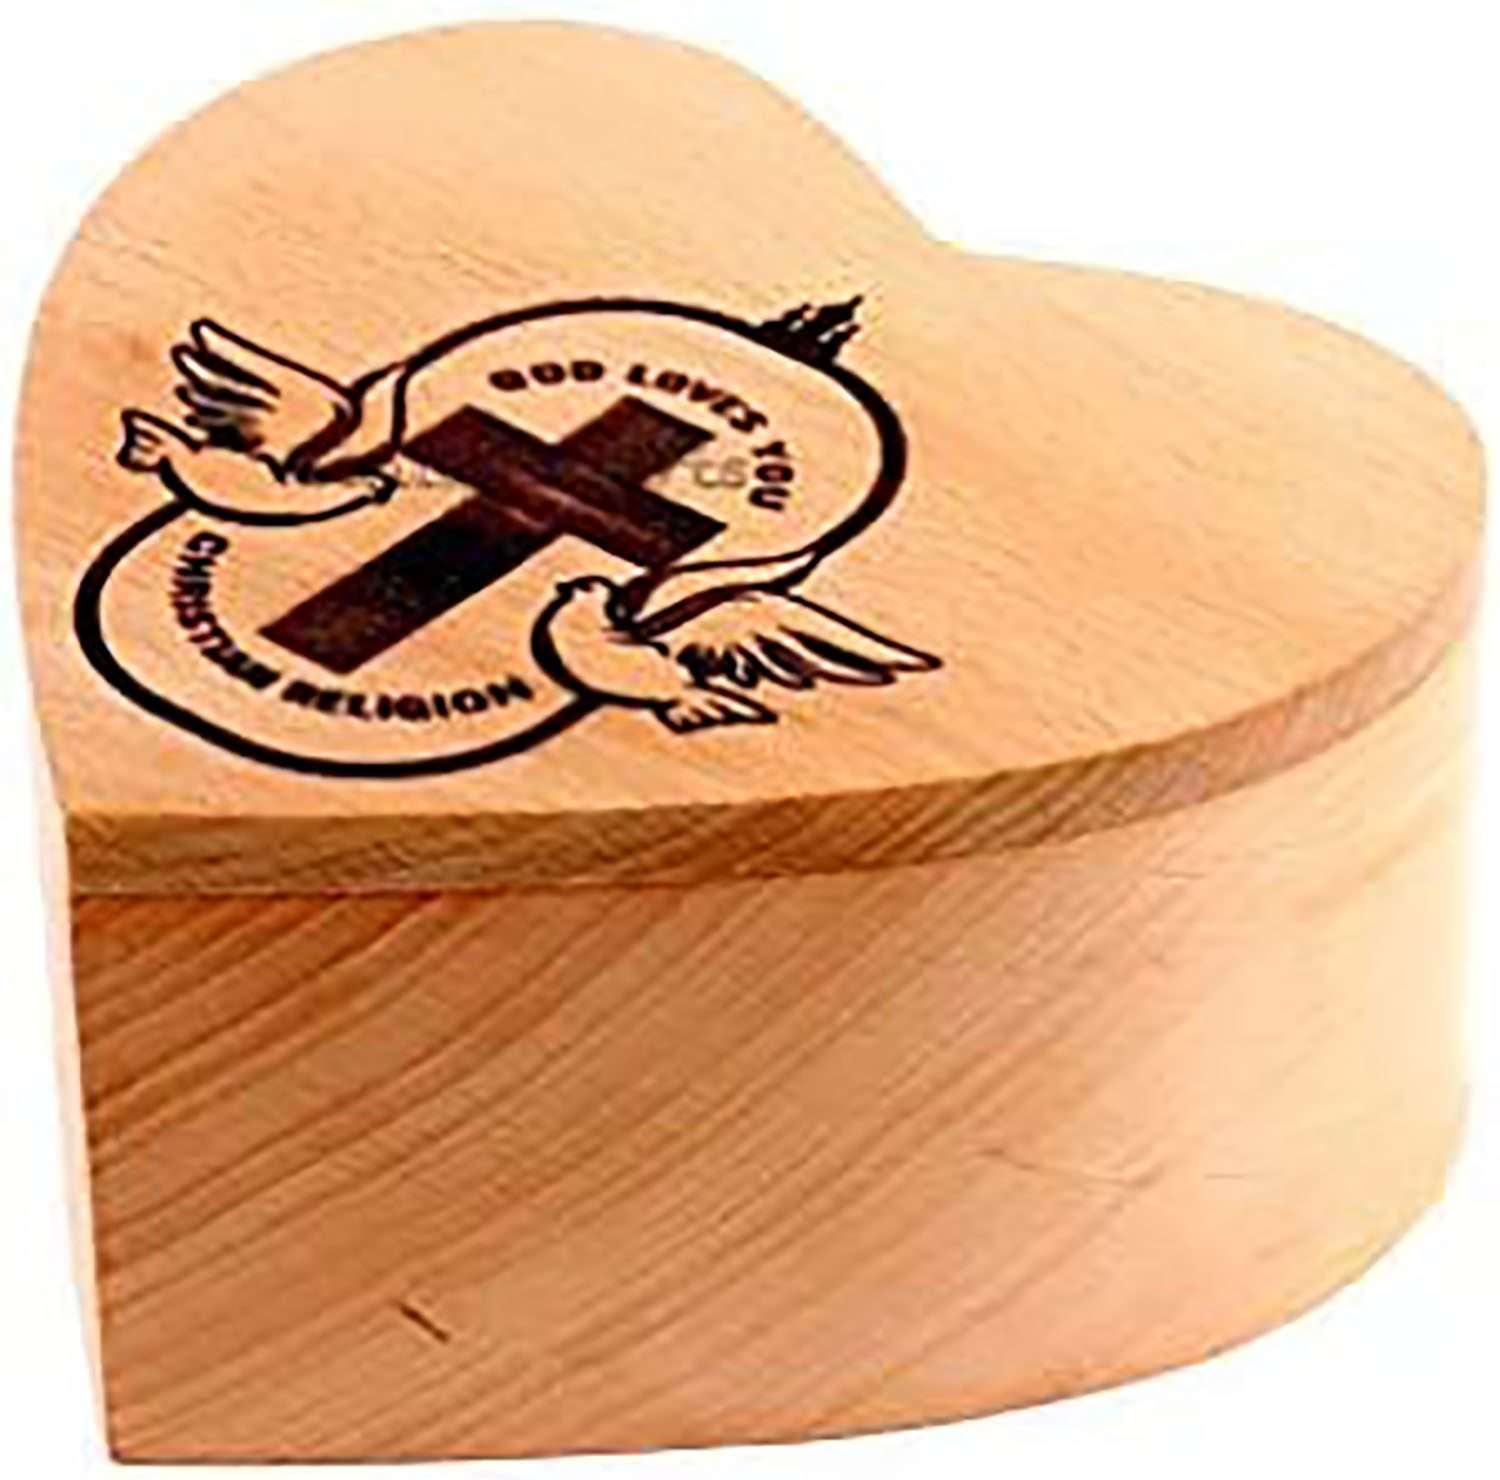 Unique Wood Heart Shaped Cremation Urn for Human Ashes Engraving | Handcrafted Wooden Box for urn | Wood Urn Box manufacturer & supplier